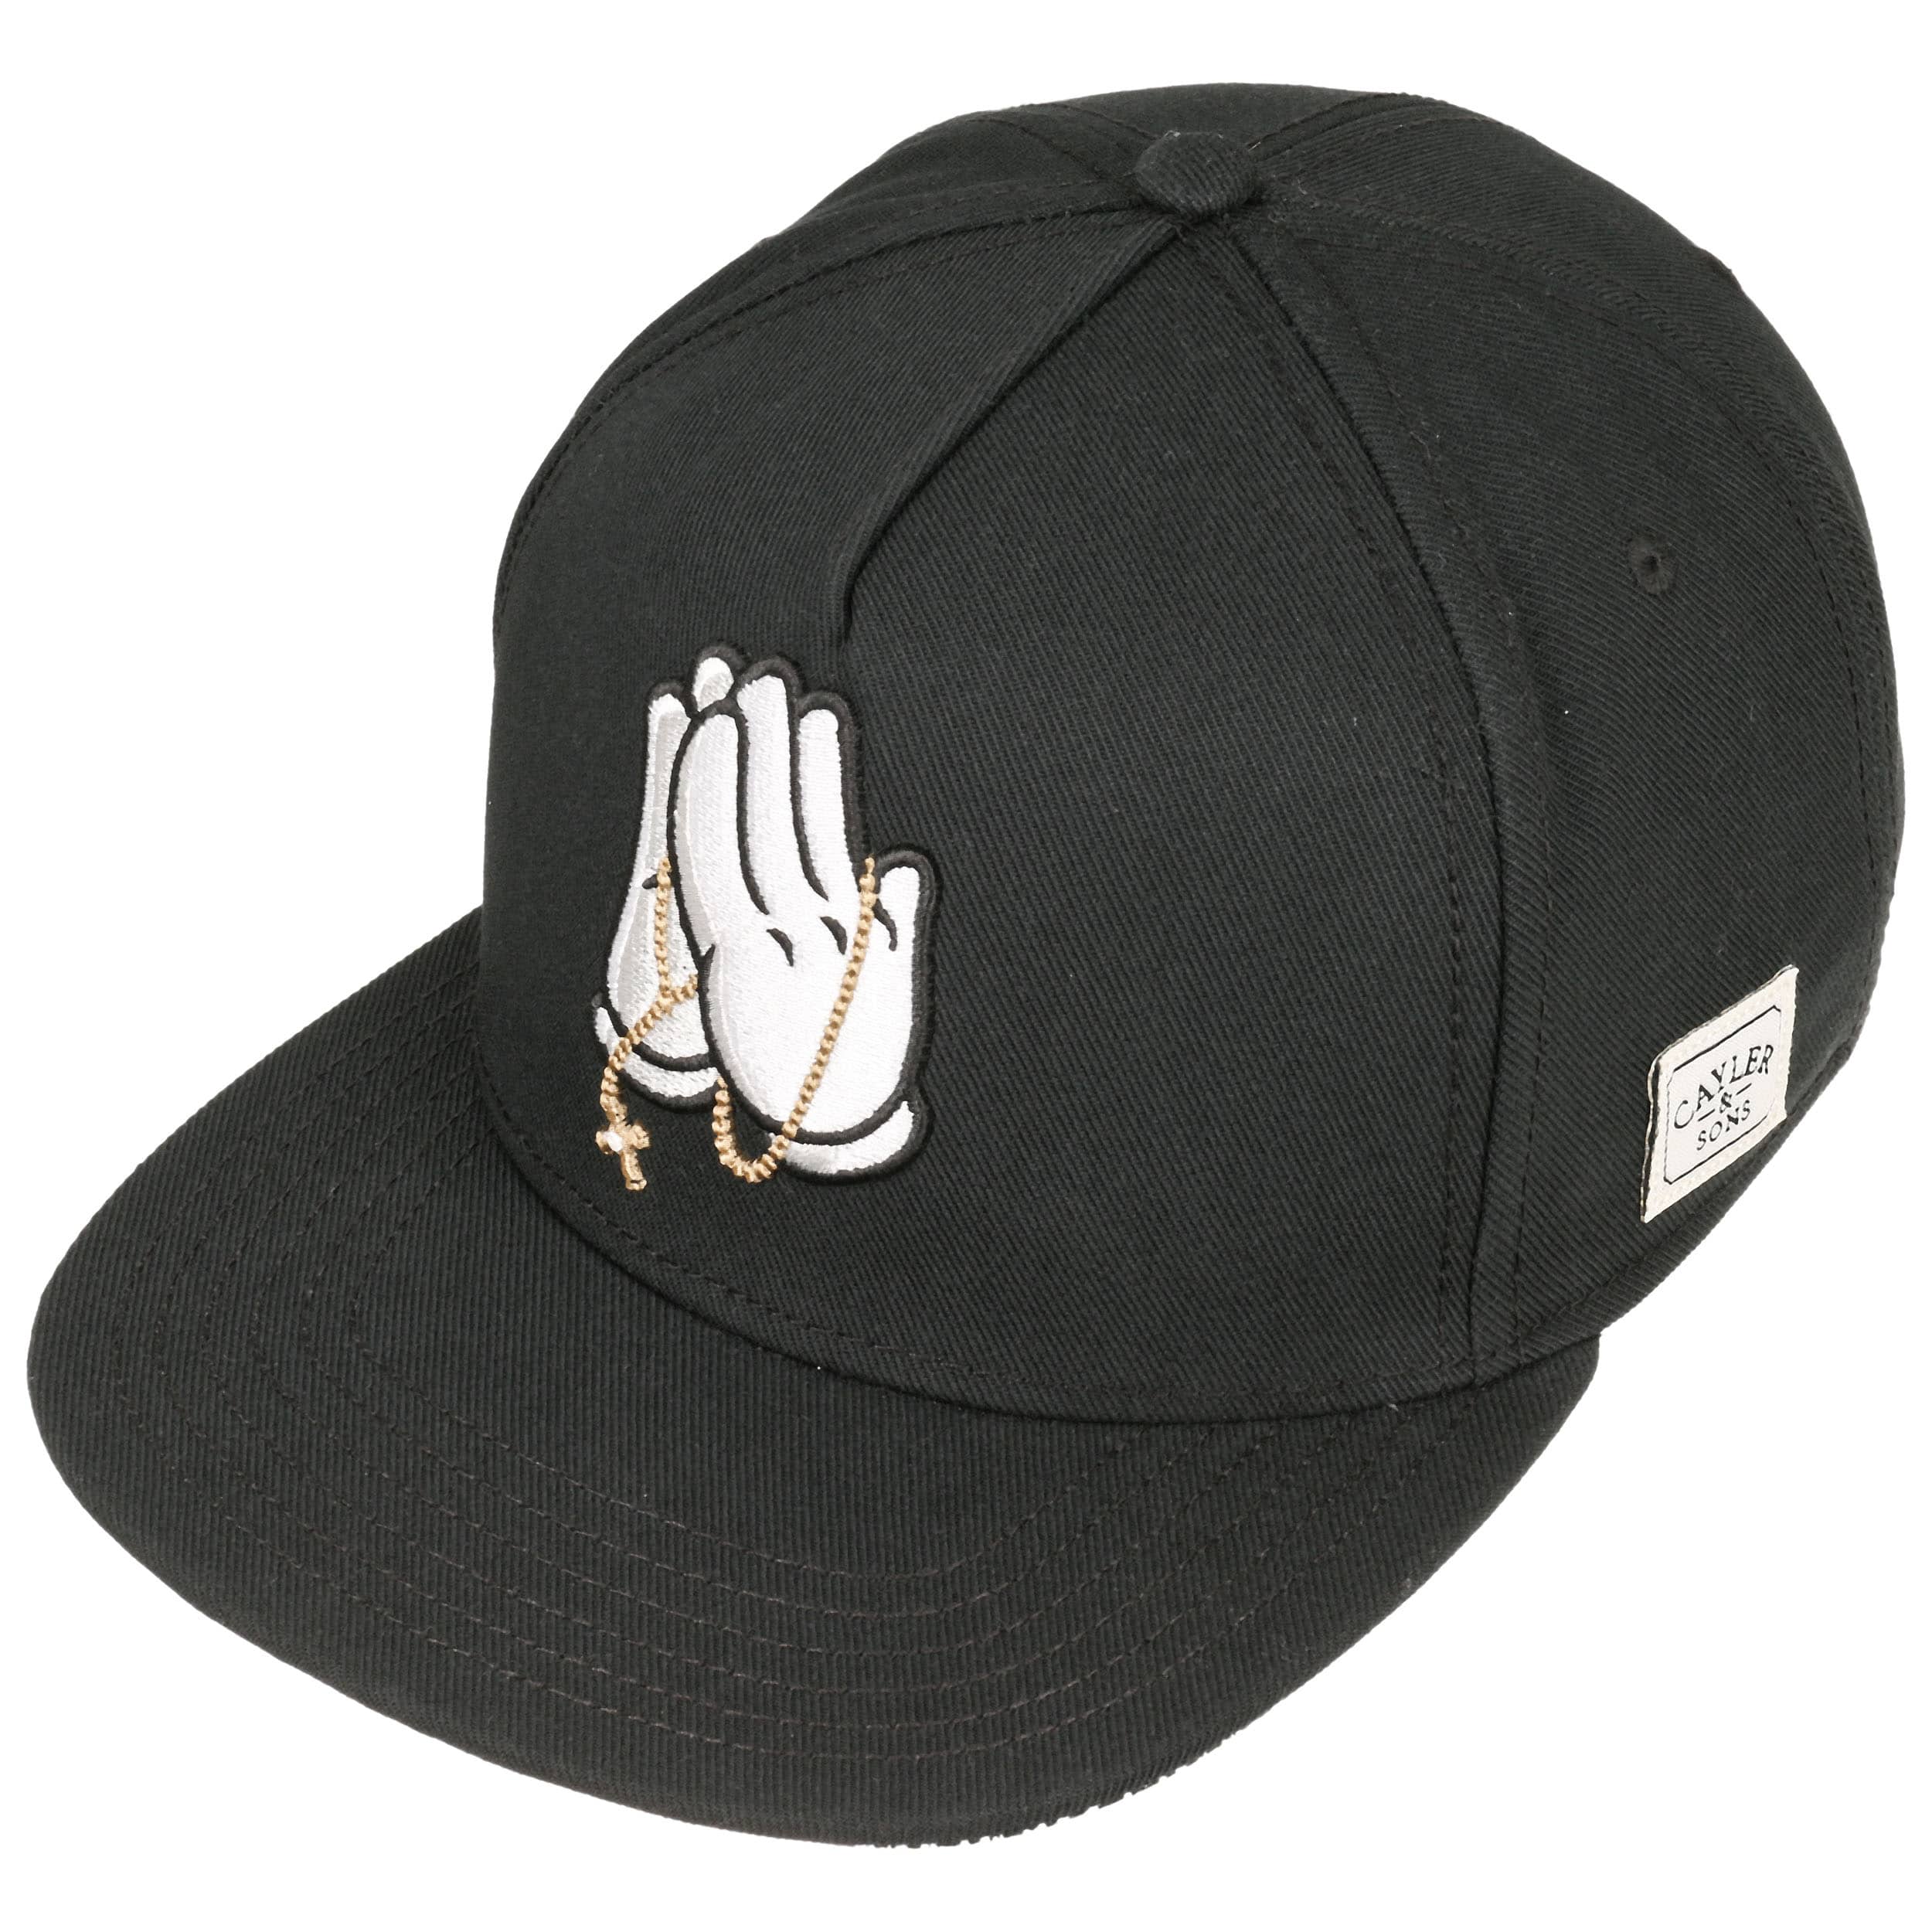 Pray For Classic Cap by Cayler & Sons - 32,95